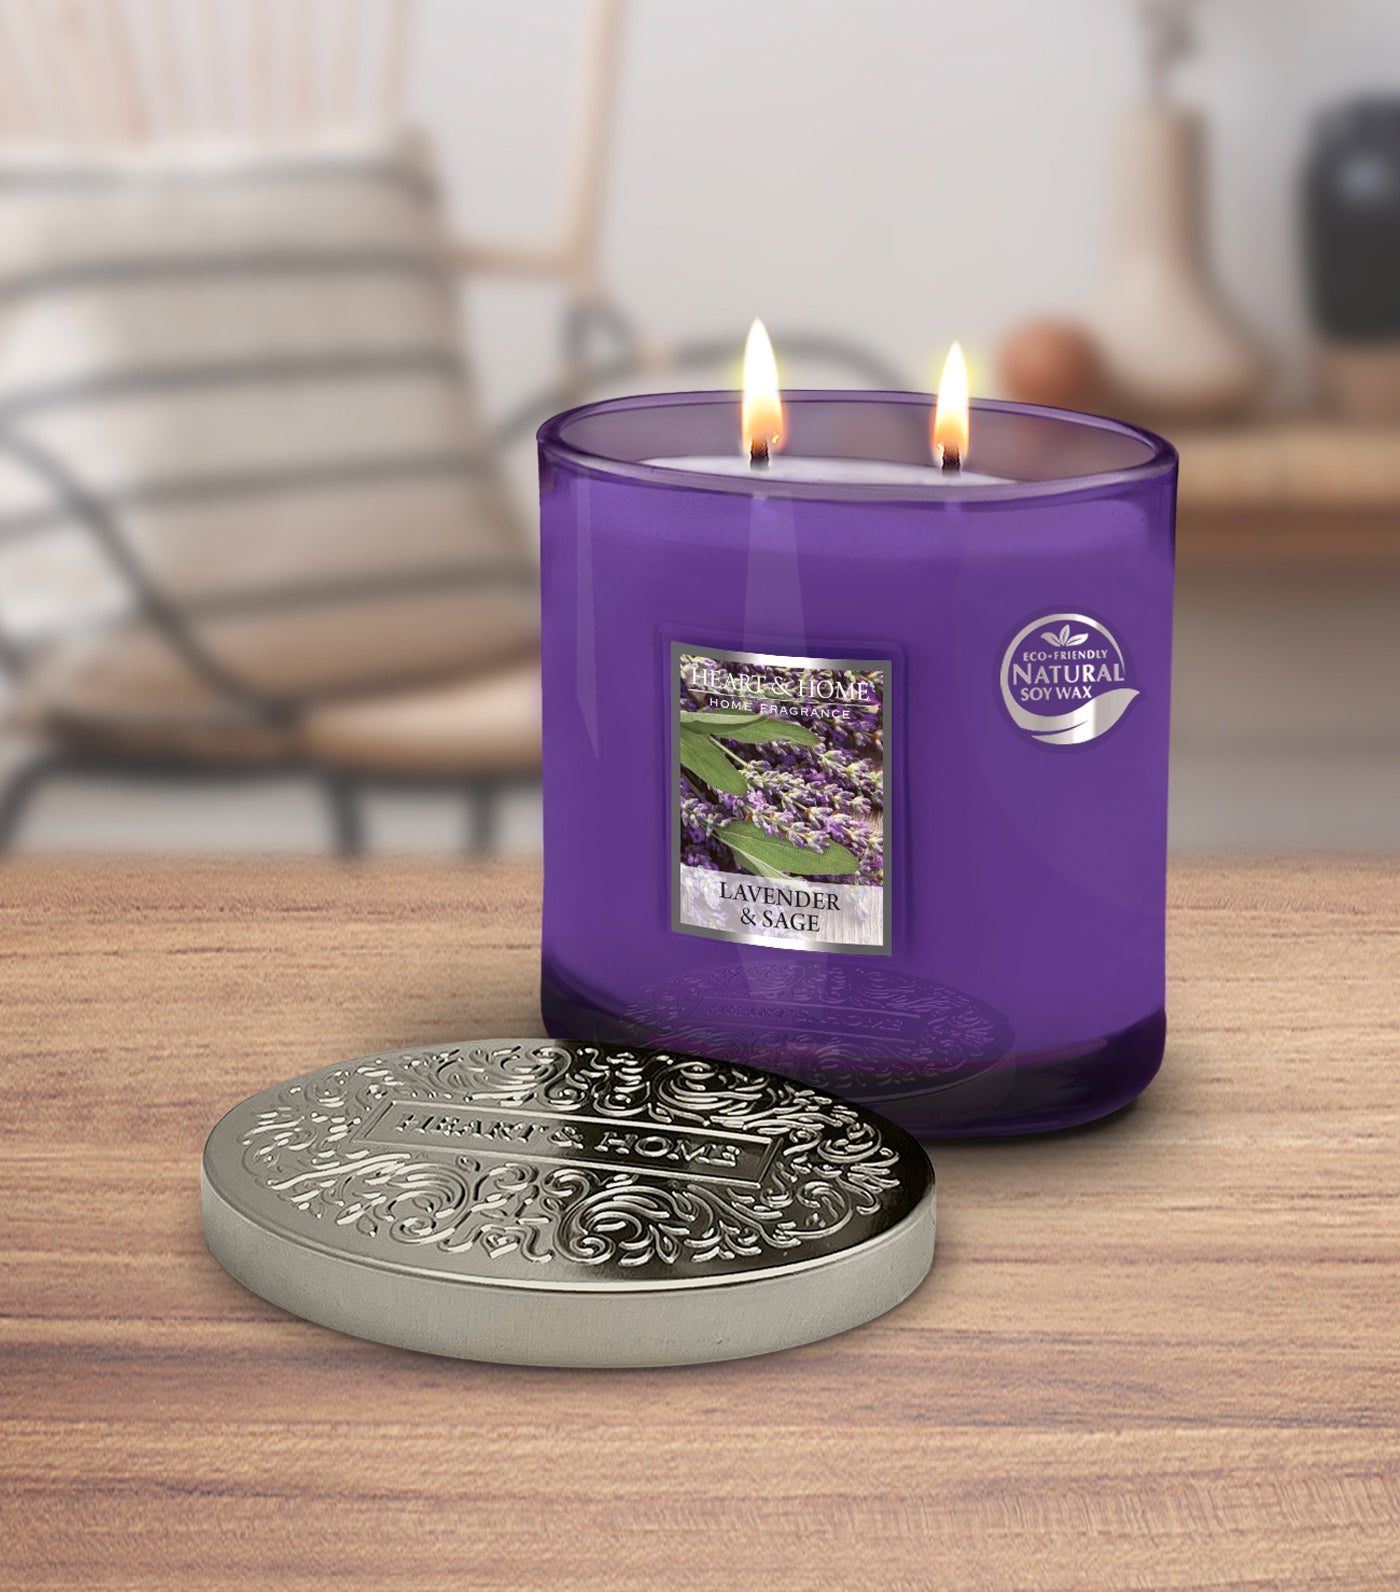 heart & home lavender & sage - twin wick soy candle